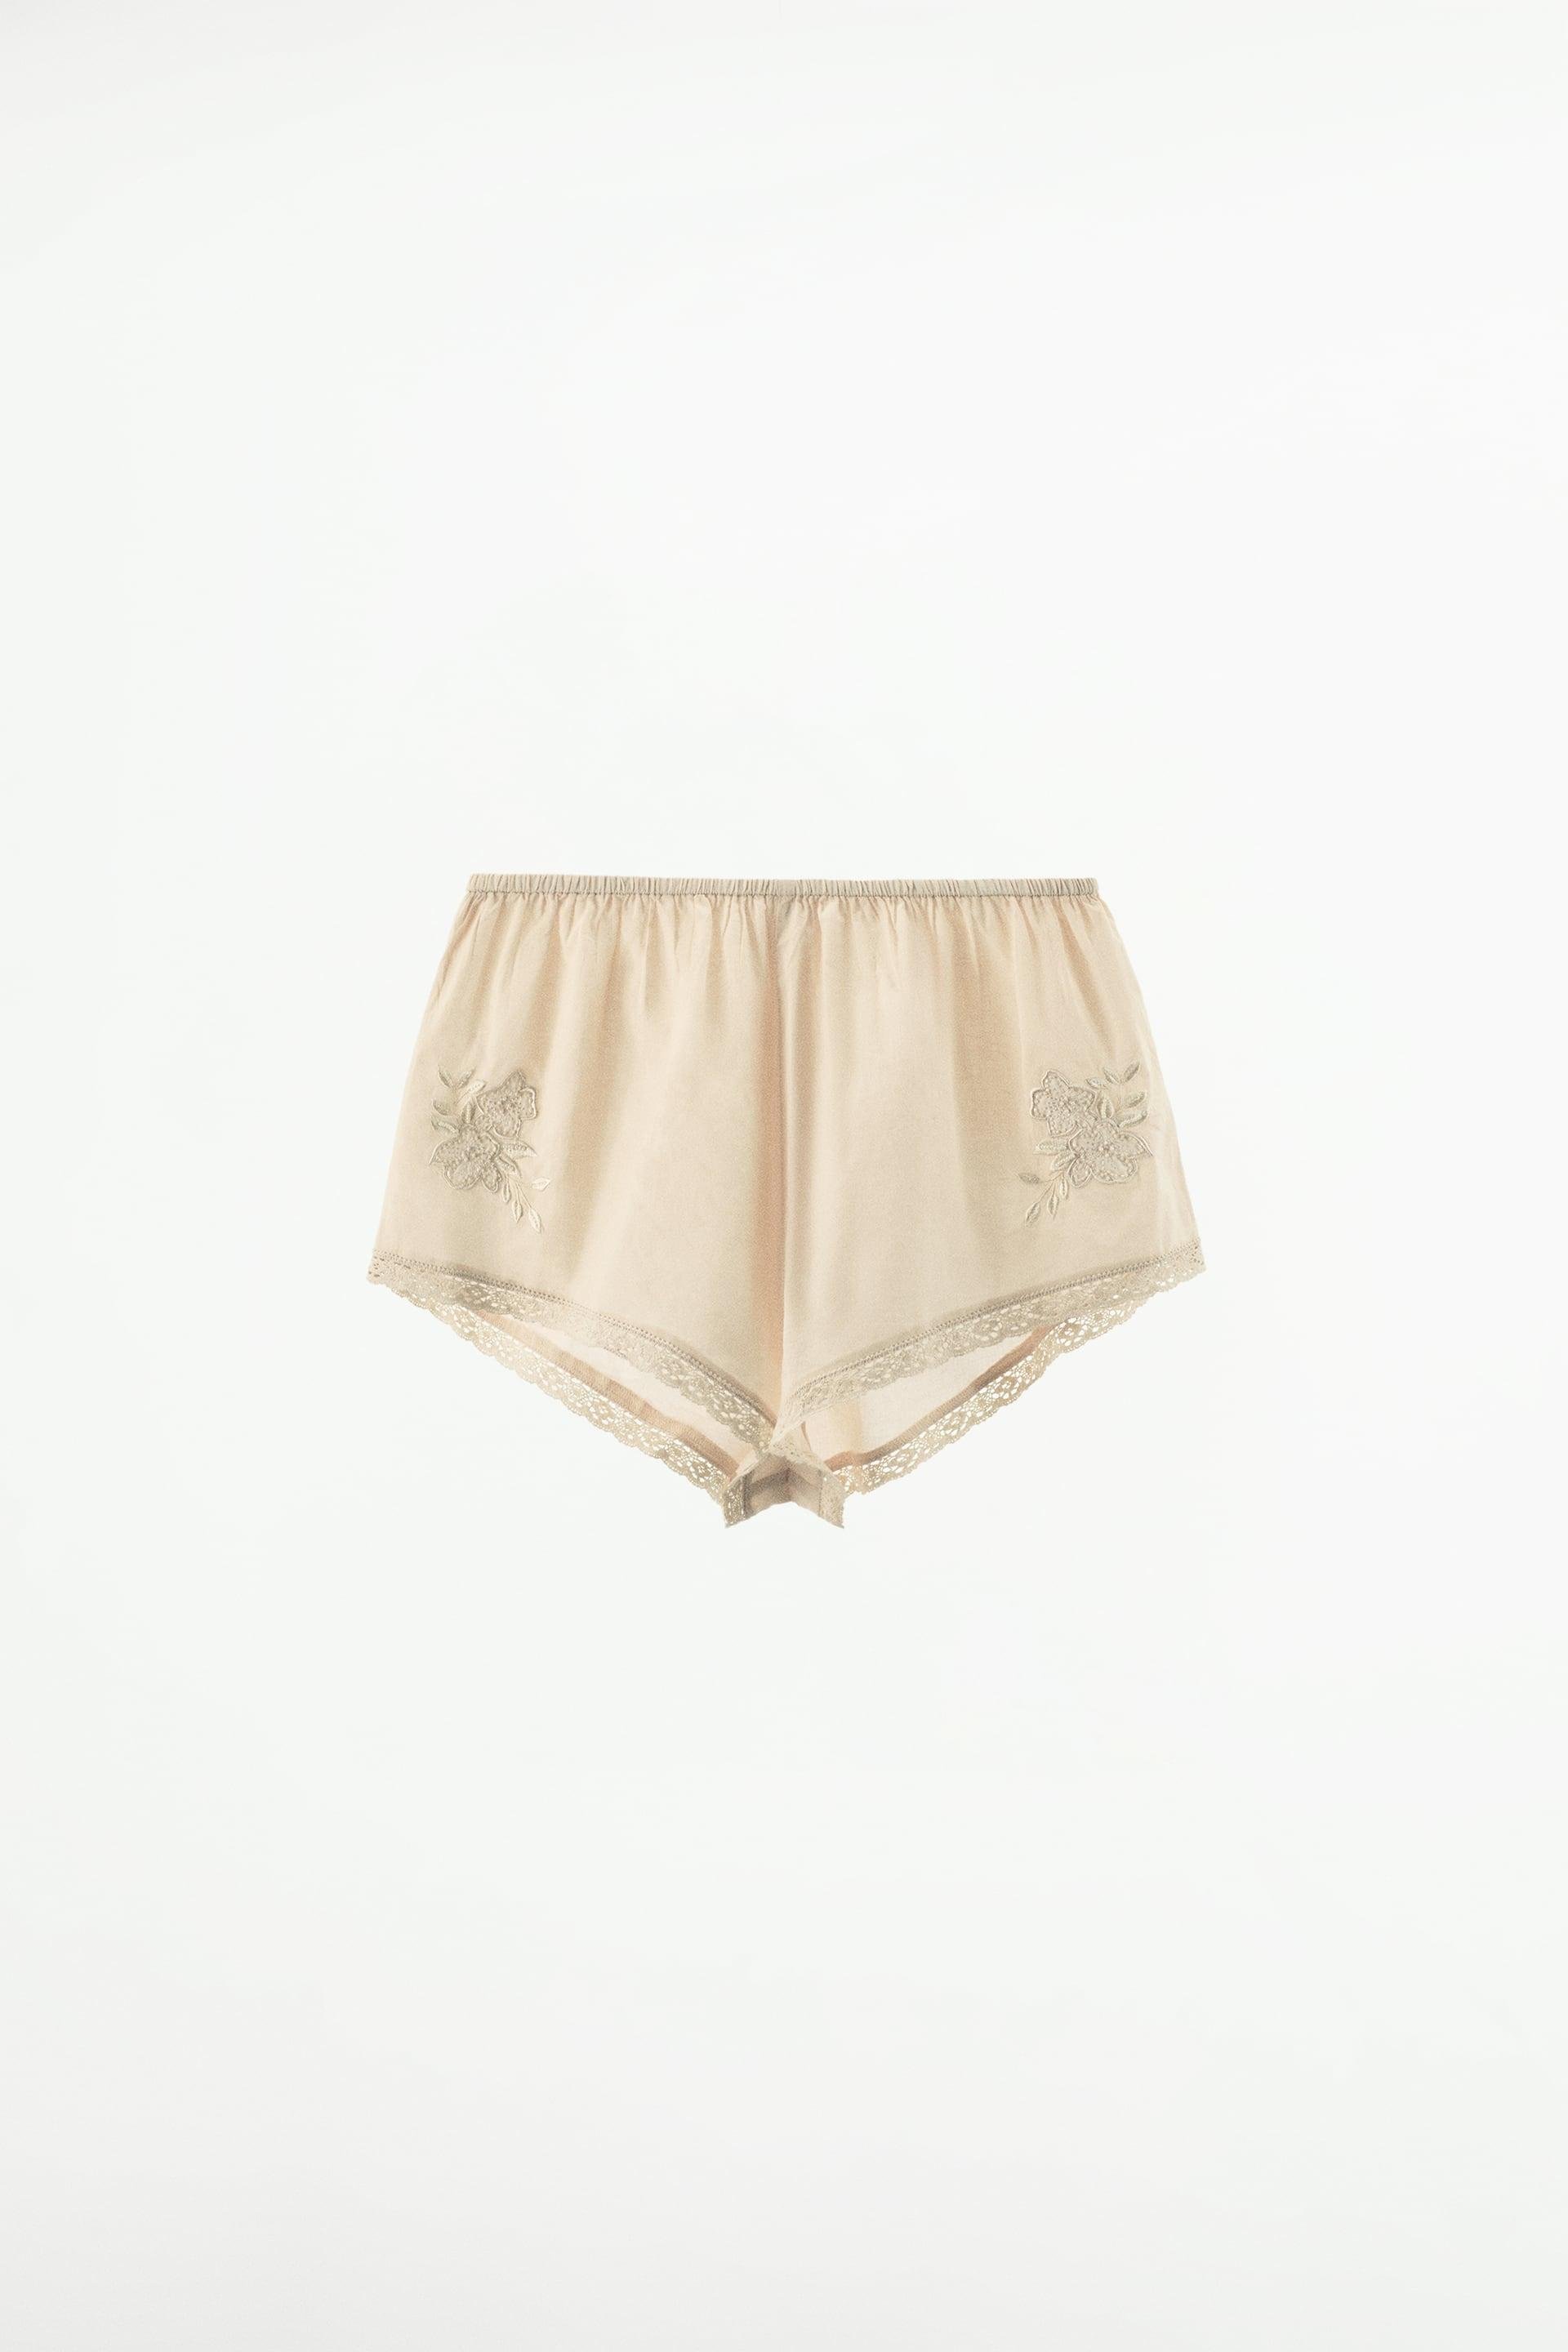 EMBROIDERED COTTON SHORTS by ZARA